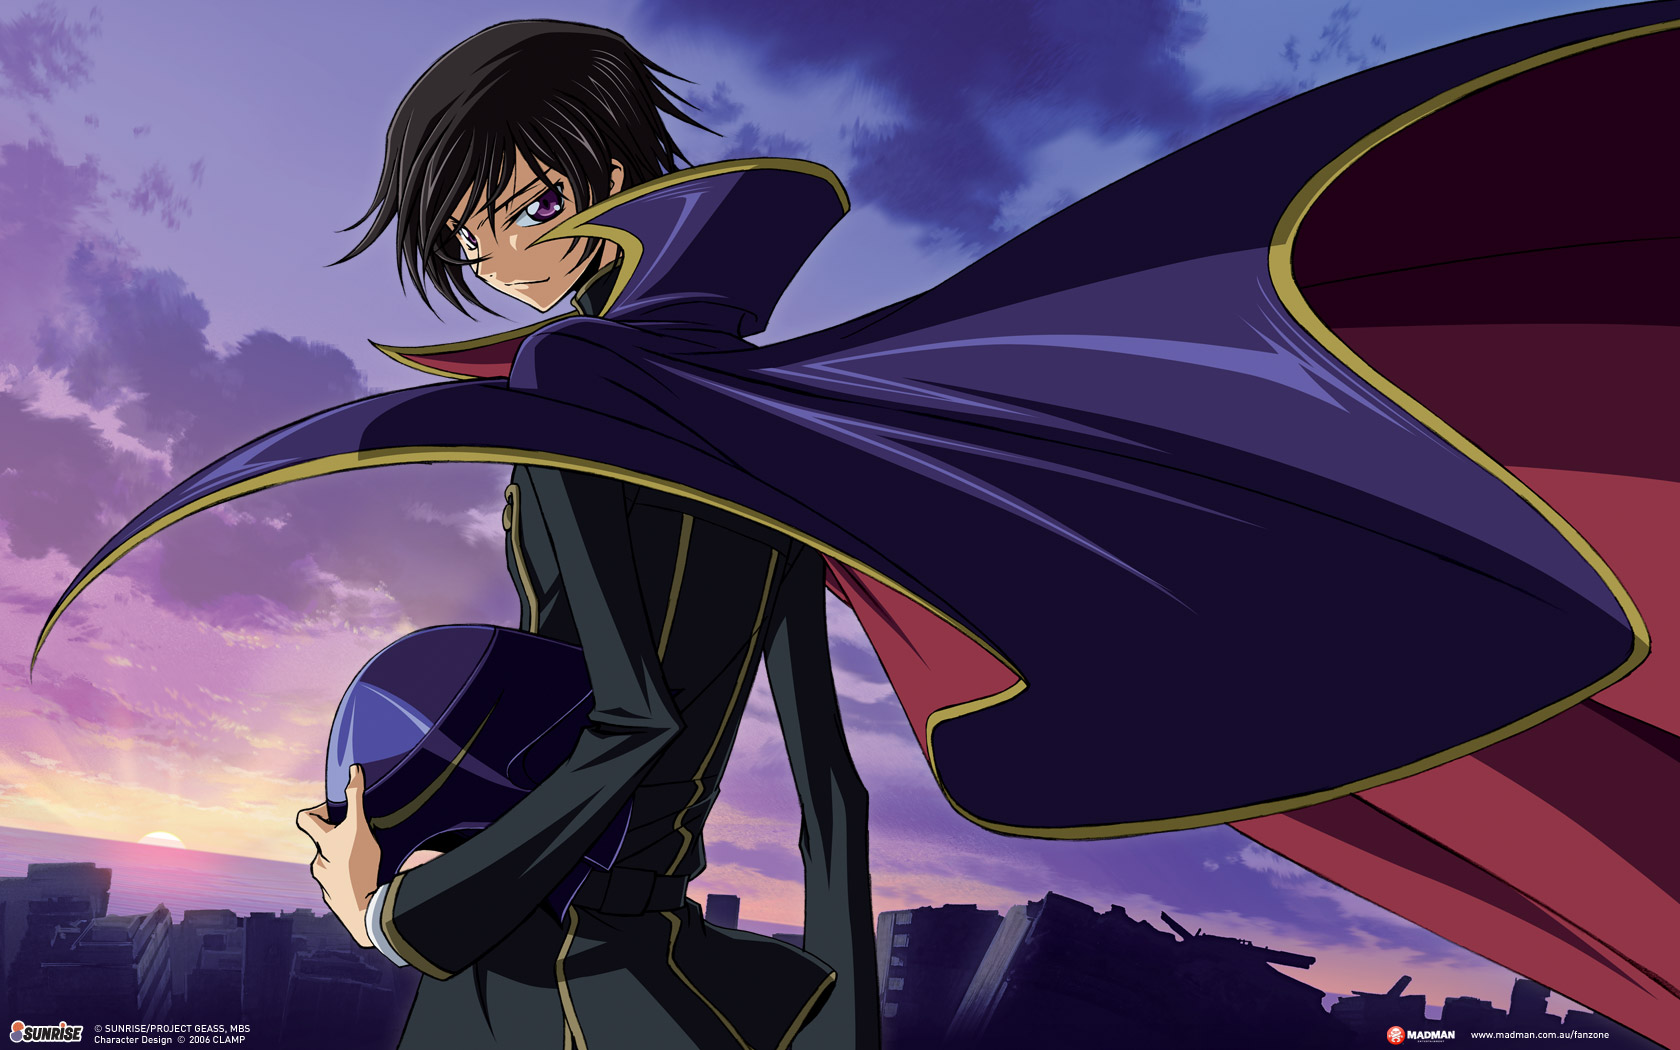 Code Geass Lelouch of the Re;surrection - Wikipedia